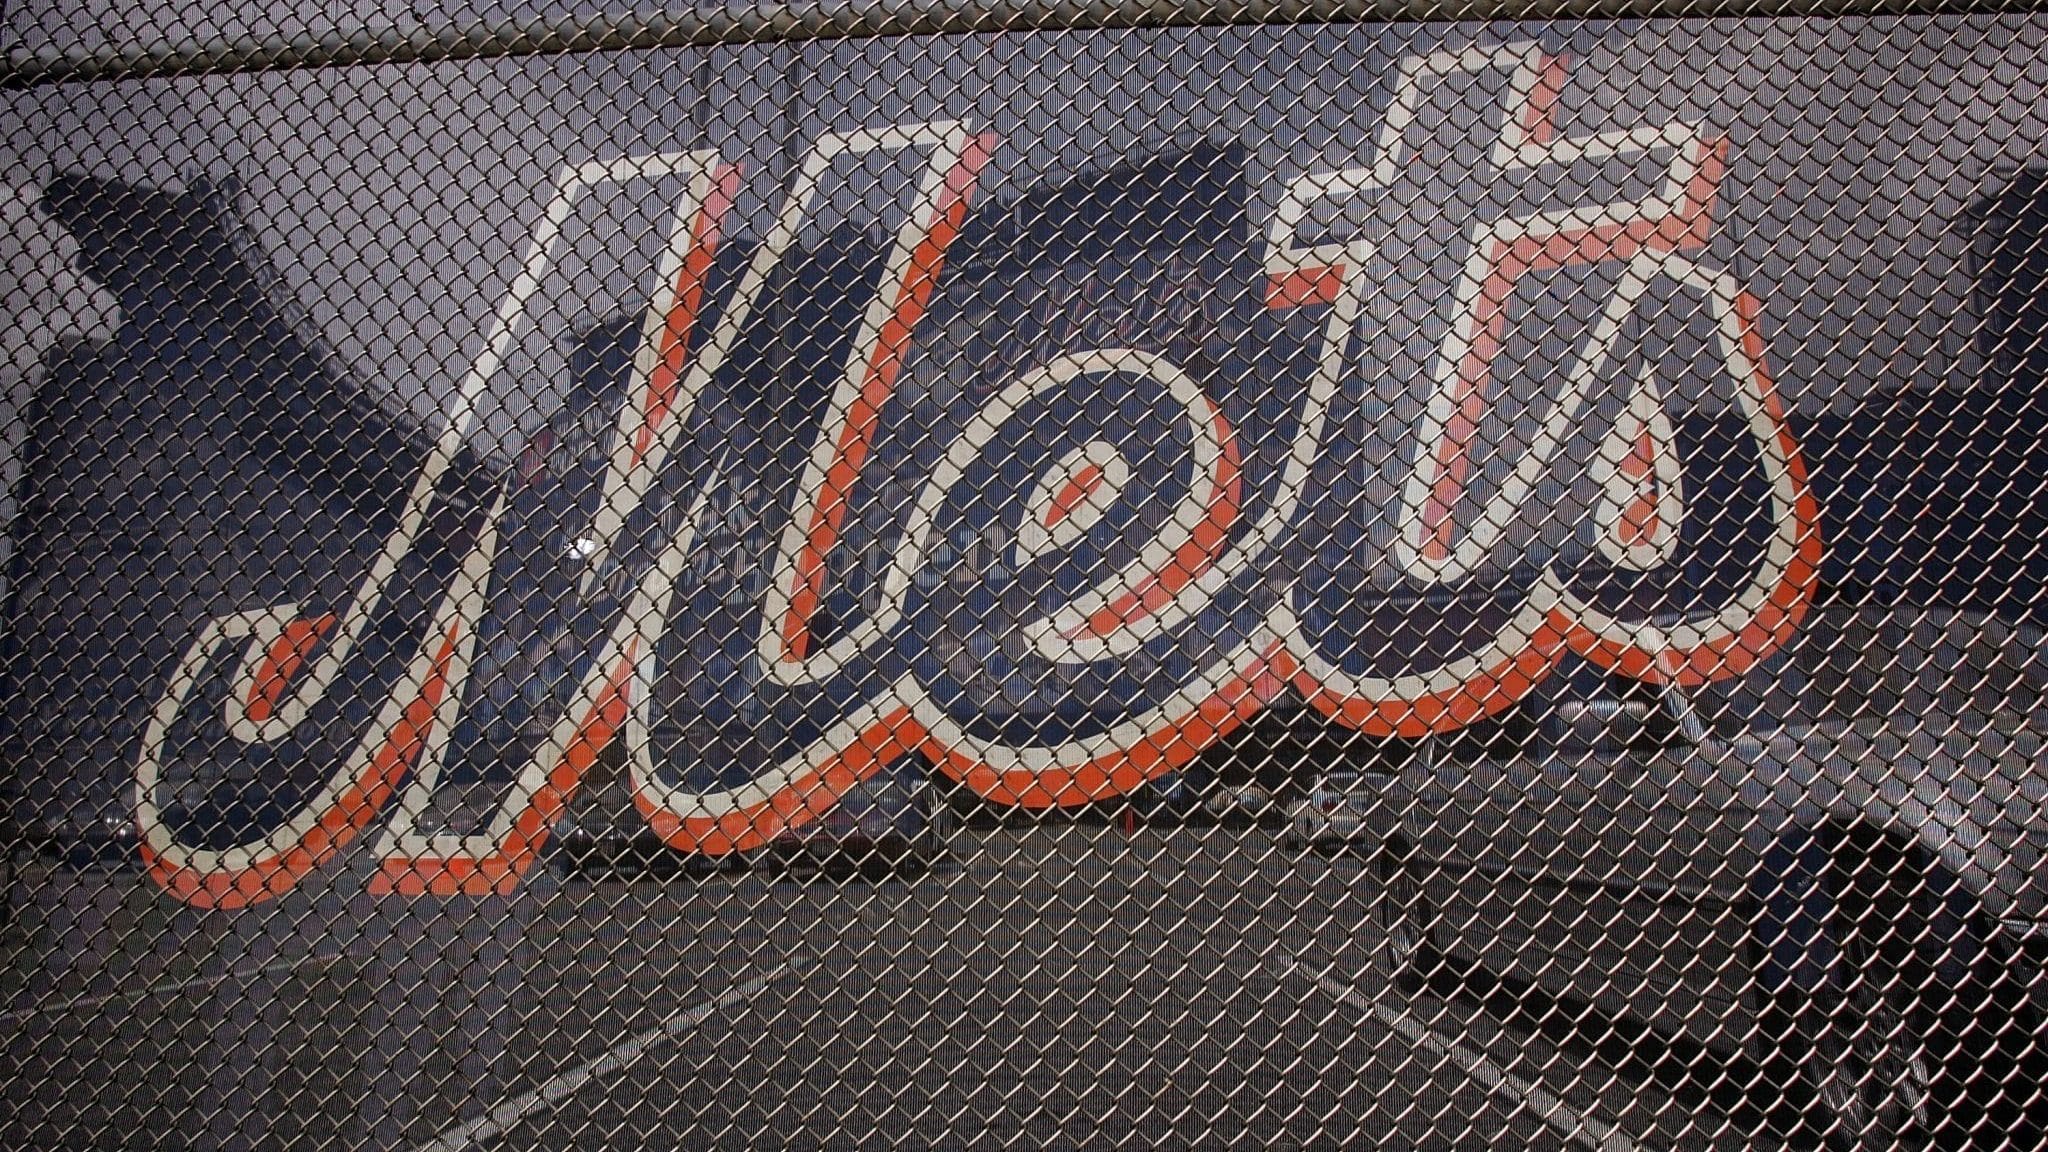 NEW YORK - JUNE 13: The Mets team logo is displayed at Shea Stadium, home of the New York Mets baseball team, June 13, 2005 in the Queens borough of New York City. In the latest attempt for New York to salvage the 2012 Olympic bid for the city, Mayor Michael Bloomberg has committed to a plan that would help the Mets build a new stadium that could be converted for use in the Olympics if New York were to win their bid. The new stadium, which would be built adjacent to the current Shea Stadium. Steve Cohen